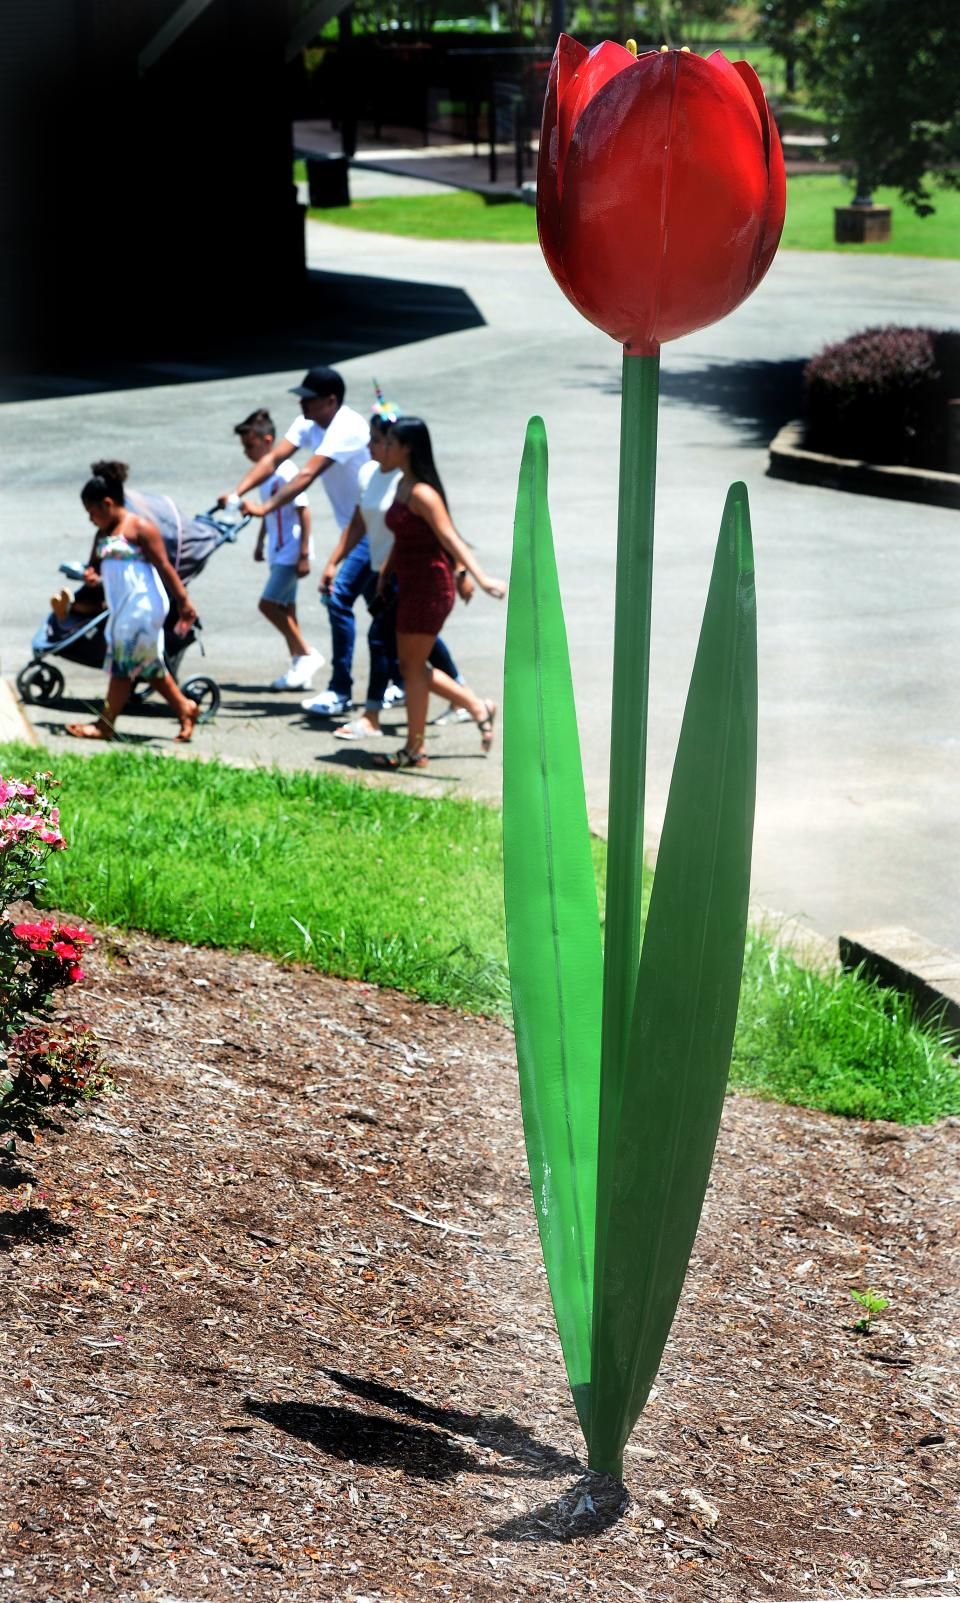 A family walks by the tulip sculpture by Casey Lewis on display at Burlington City Park.